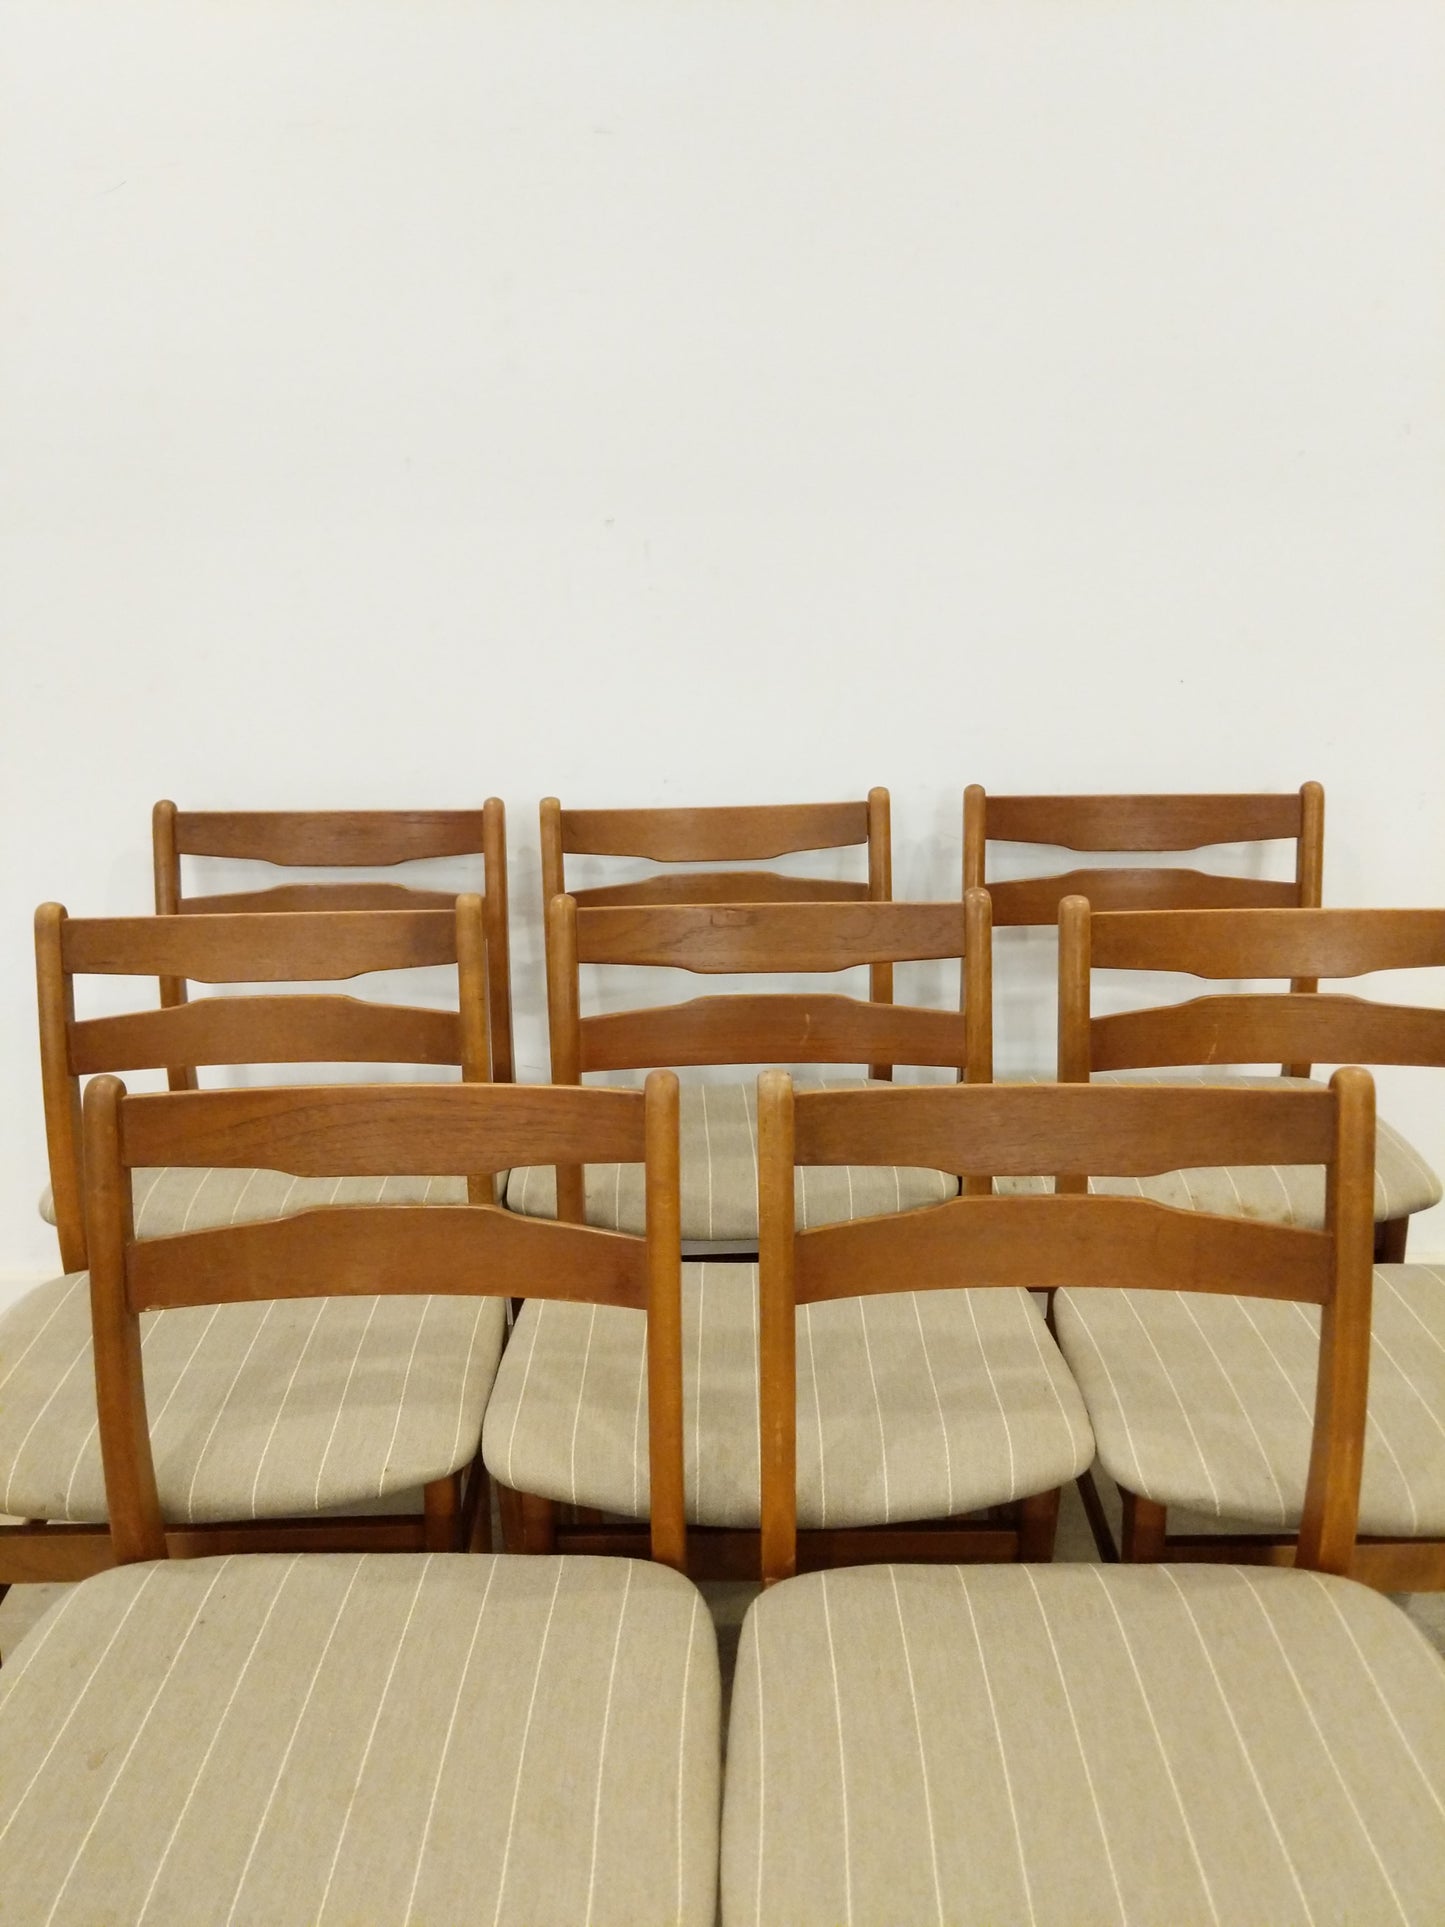 Set of 8 Vintage Danish Modern Dining Chairs